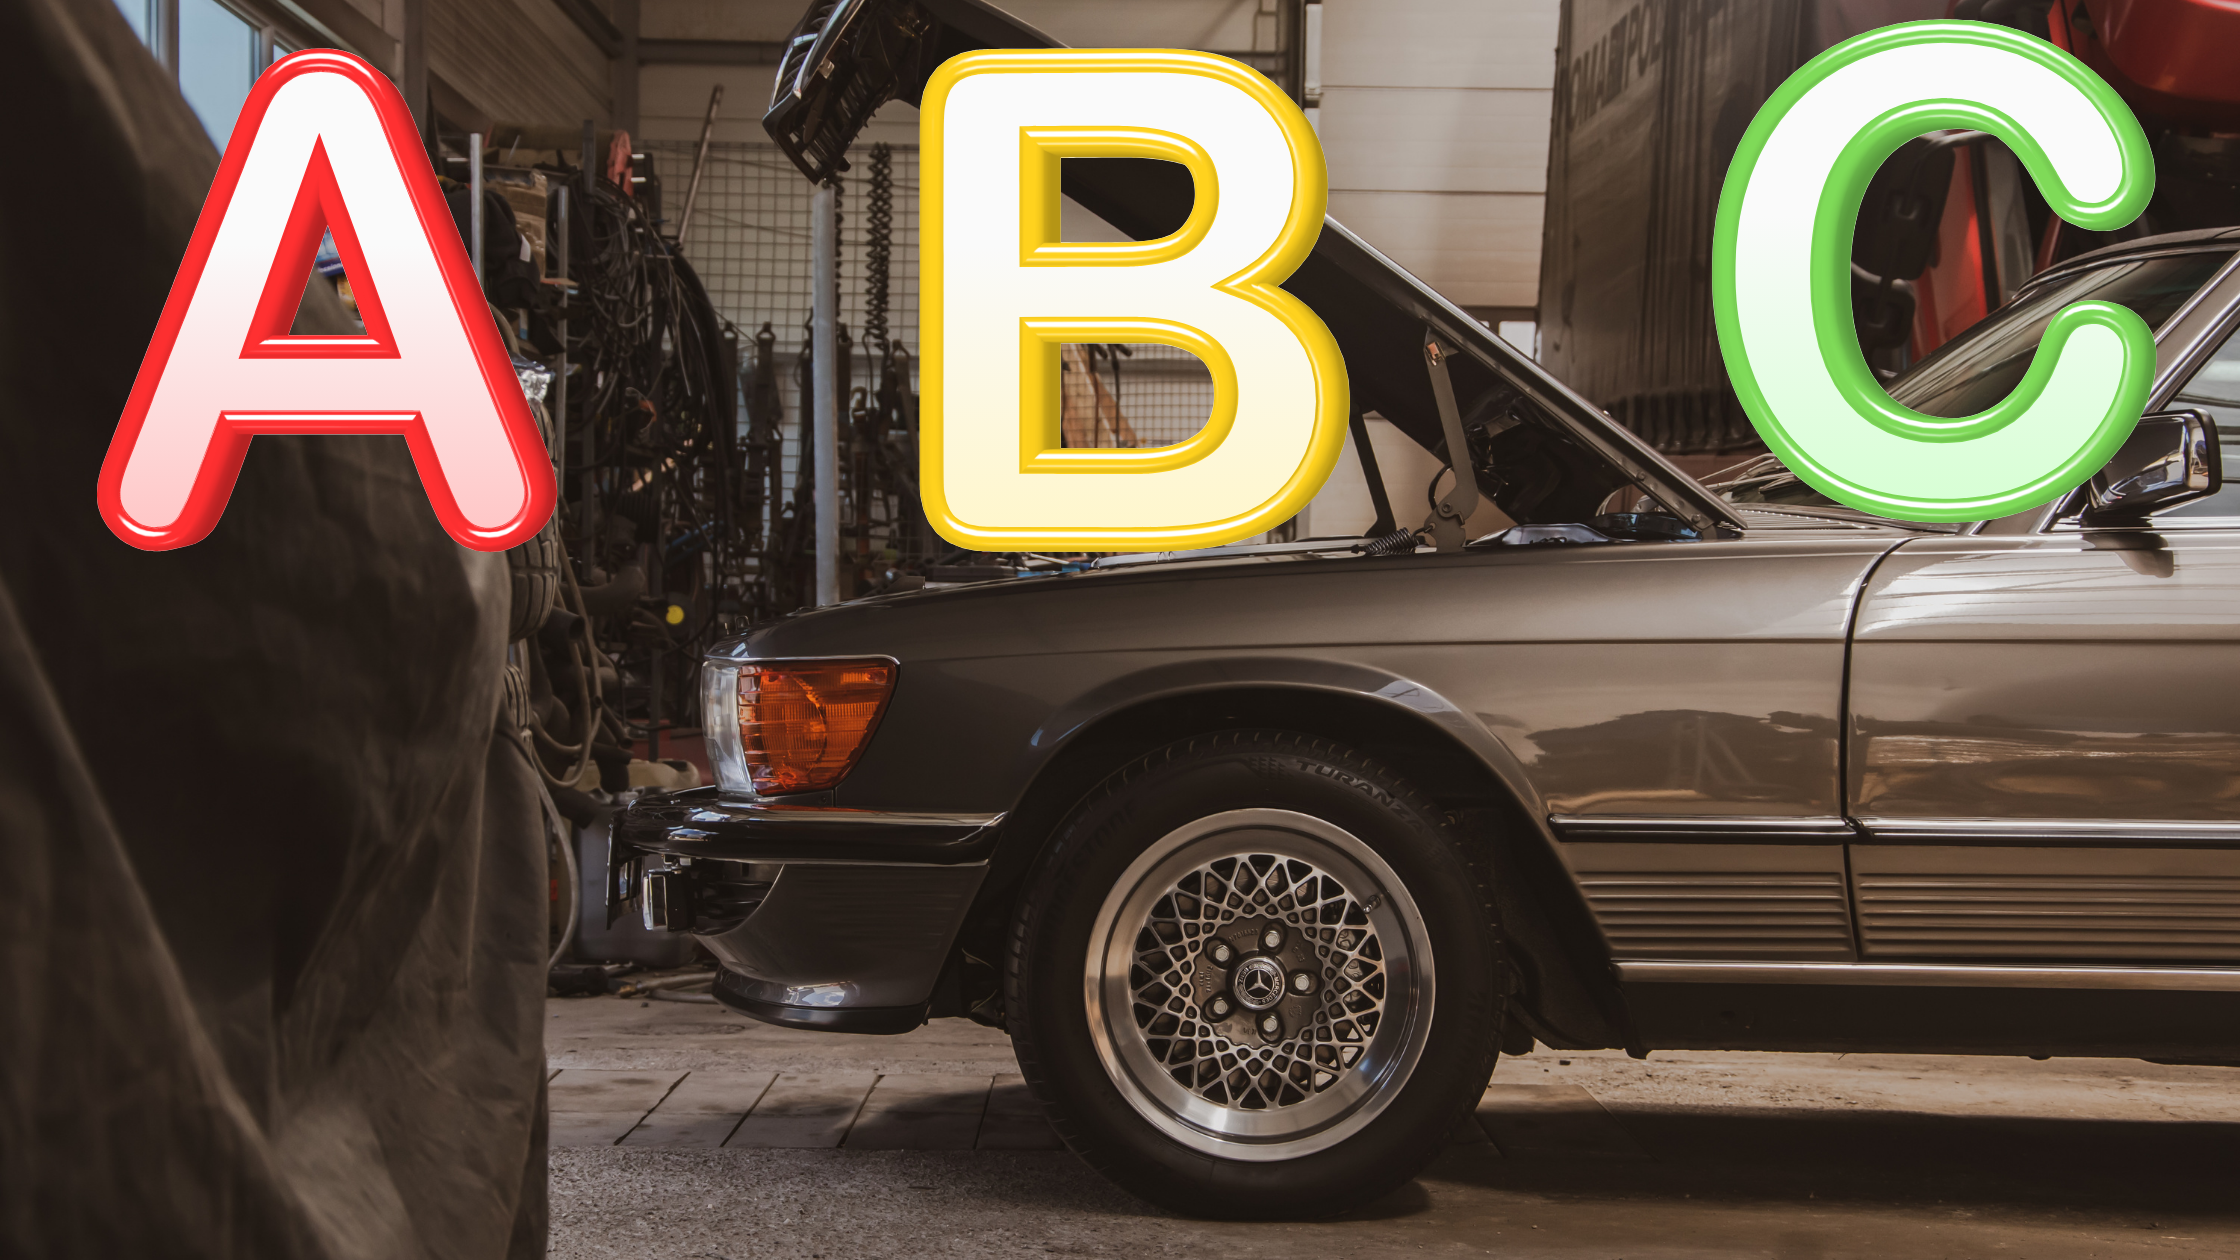 Featured image for “Discover the 3 Salvage Auto Parts Grading: A, B, and C Explained the Best”